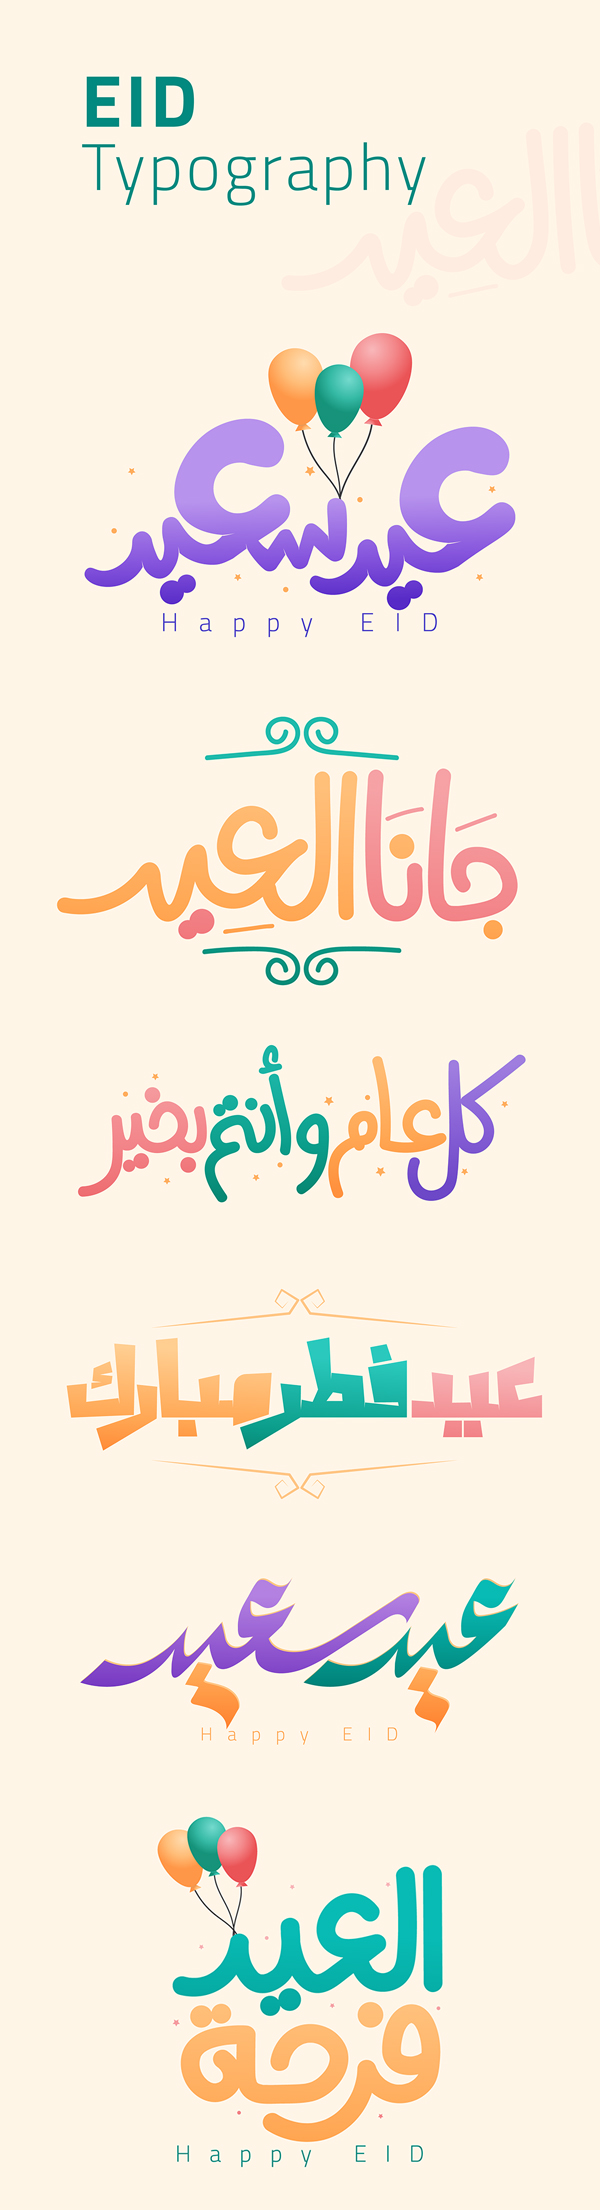 EID Typography Free Download Free Font